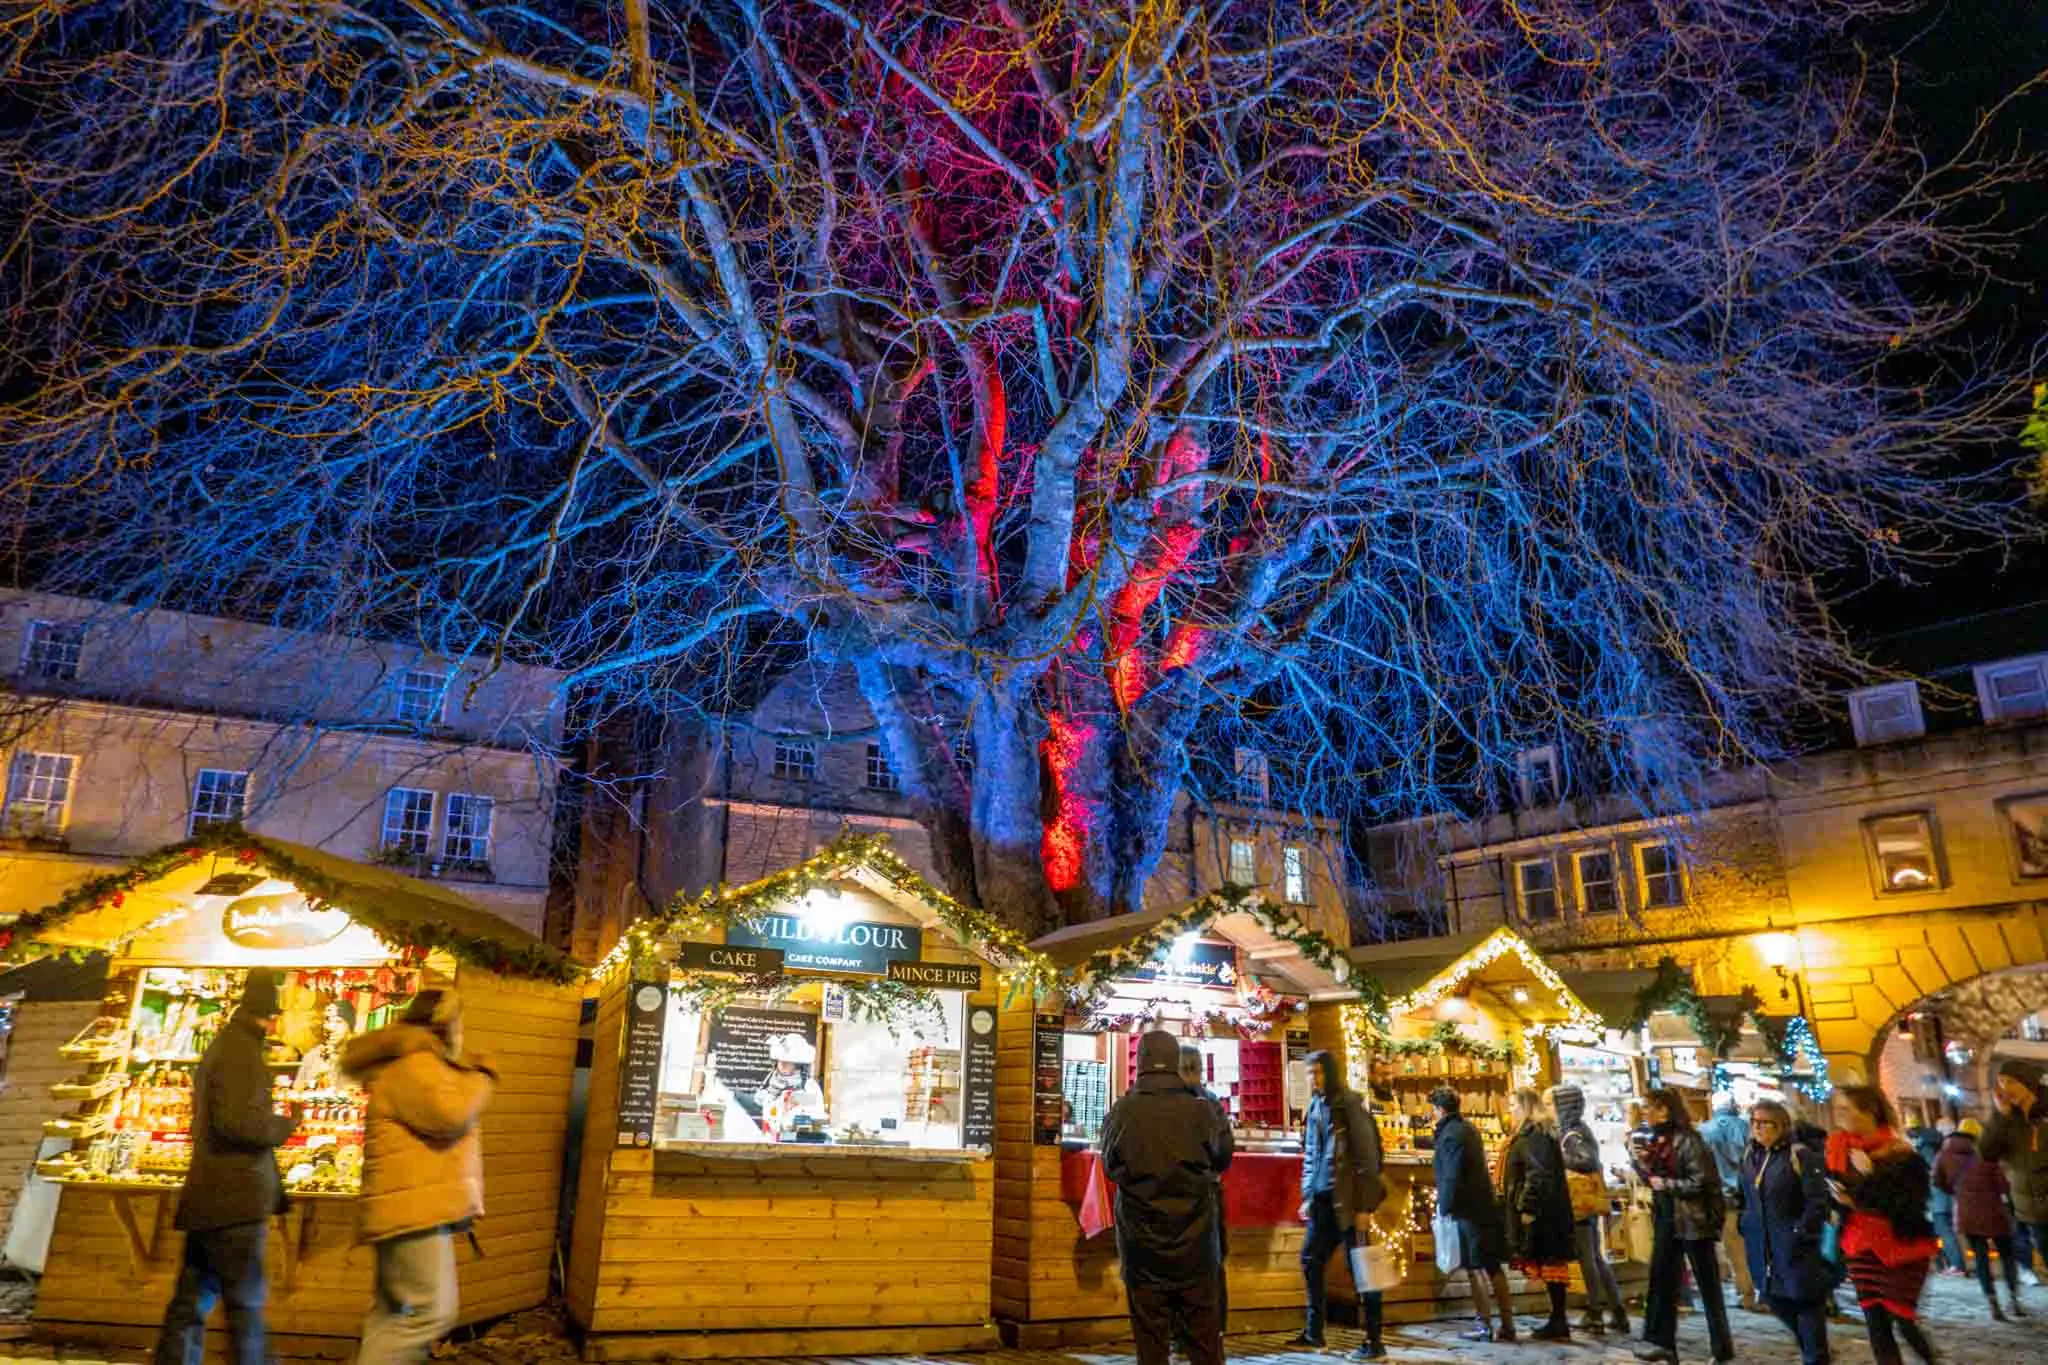 Vendor stalls at night in front of lit up trees